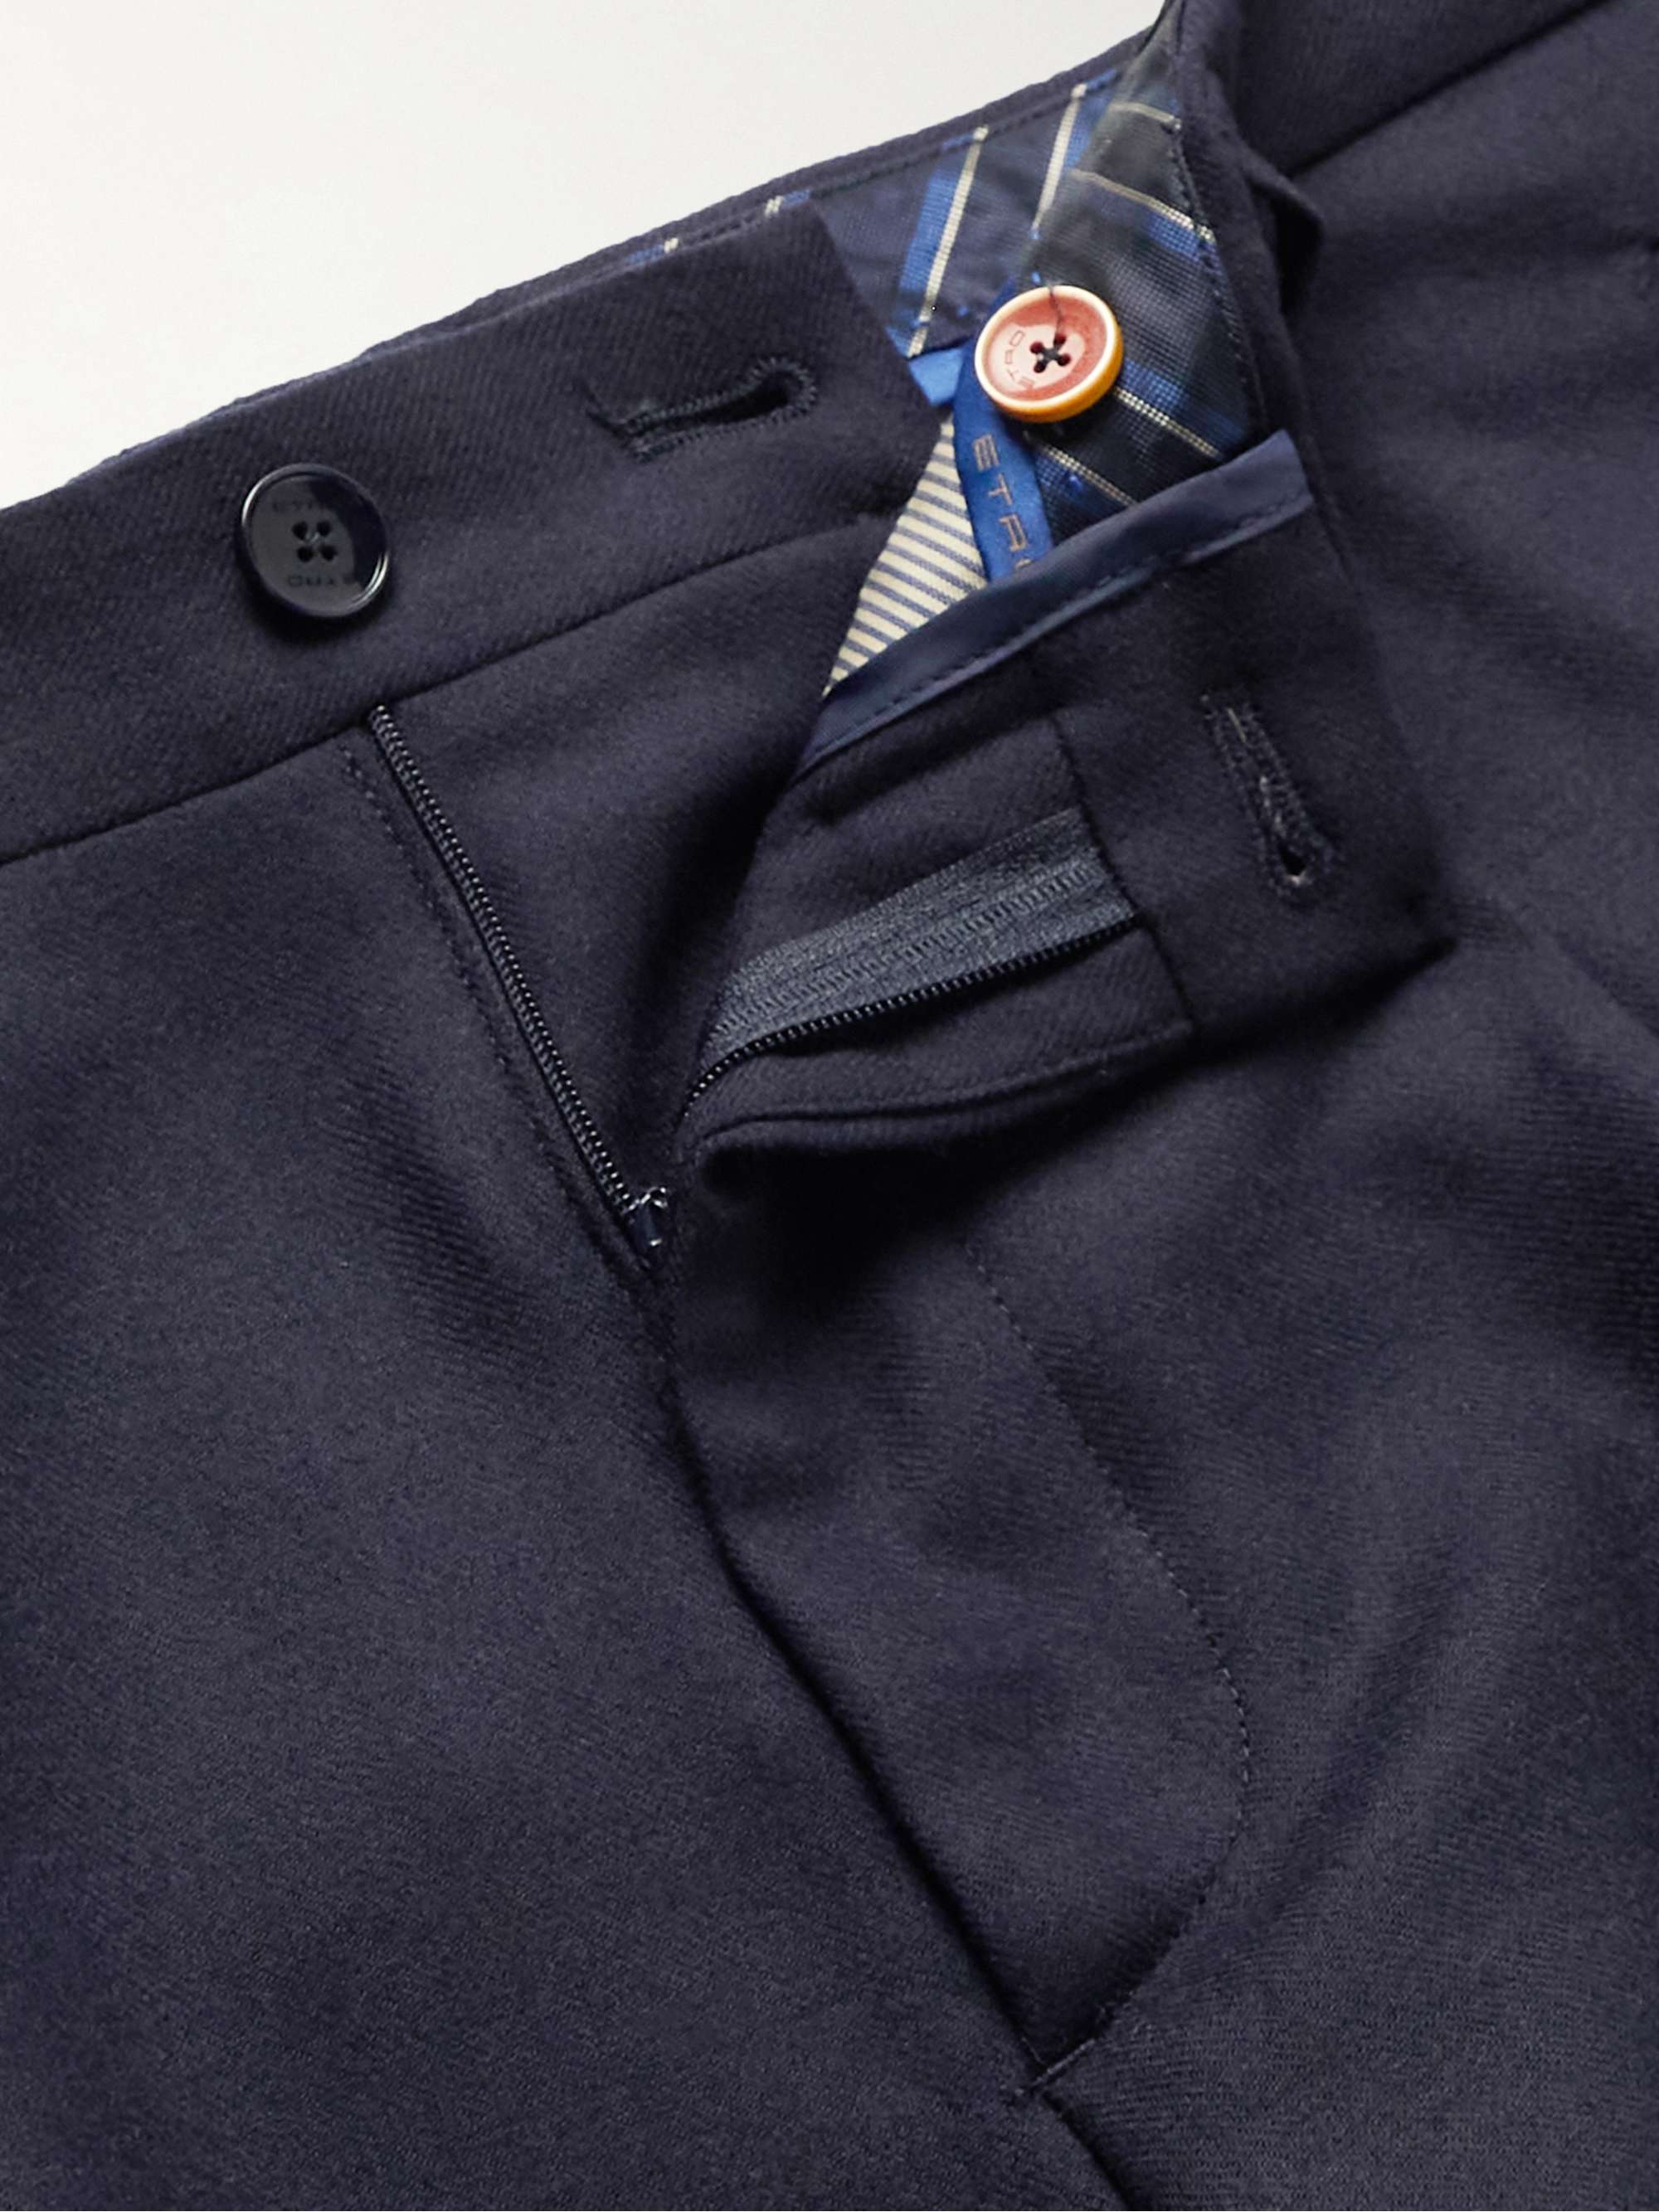 ETRO Tapered Pleated Wool-Blend Twill Trousers